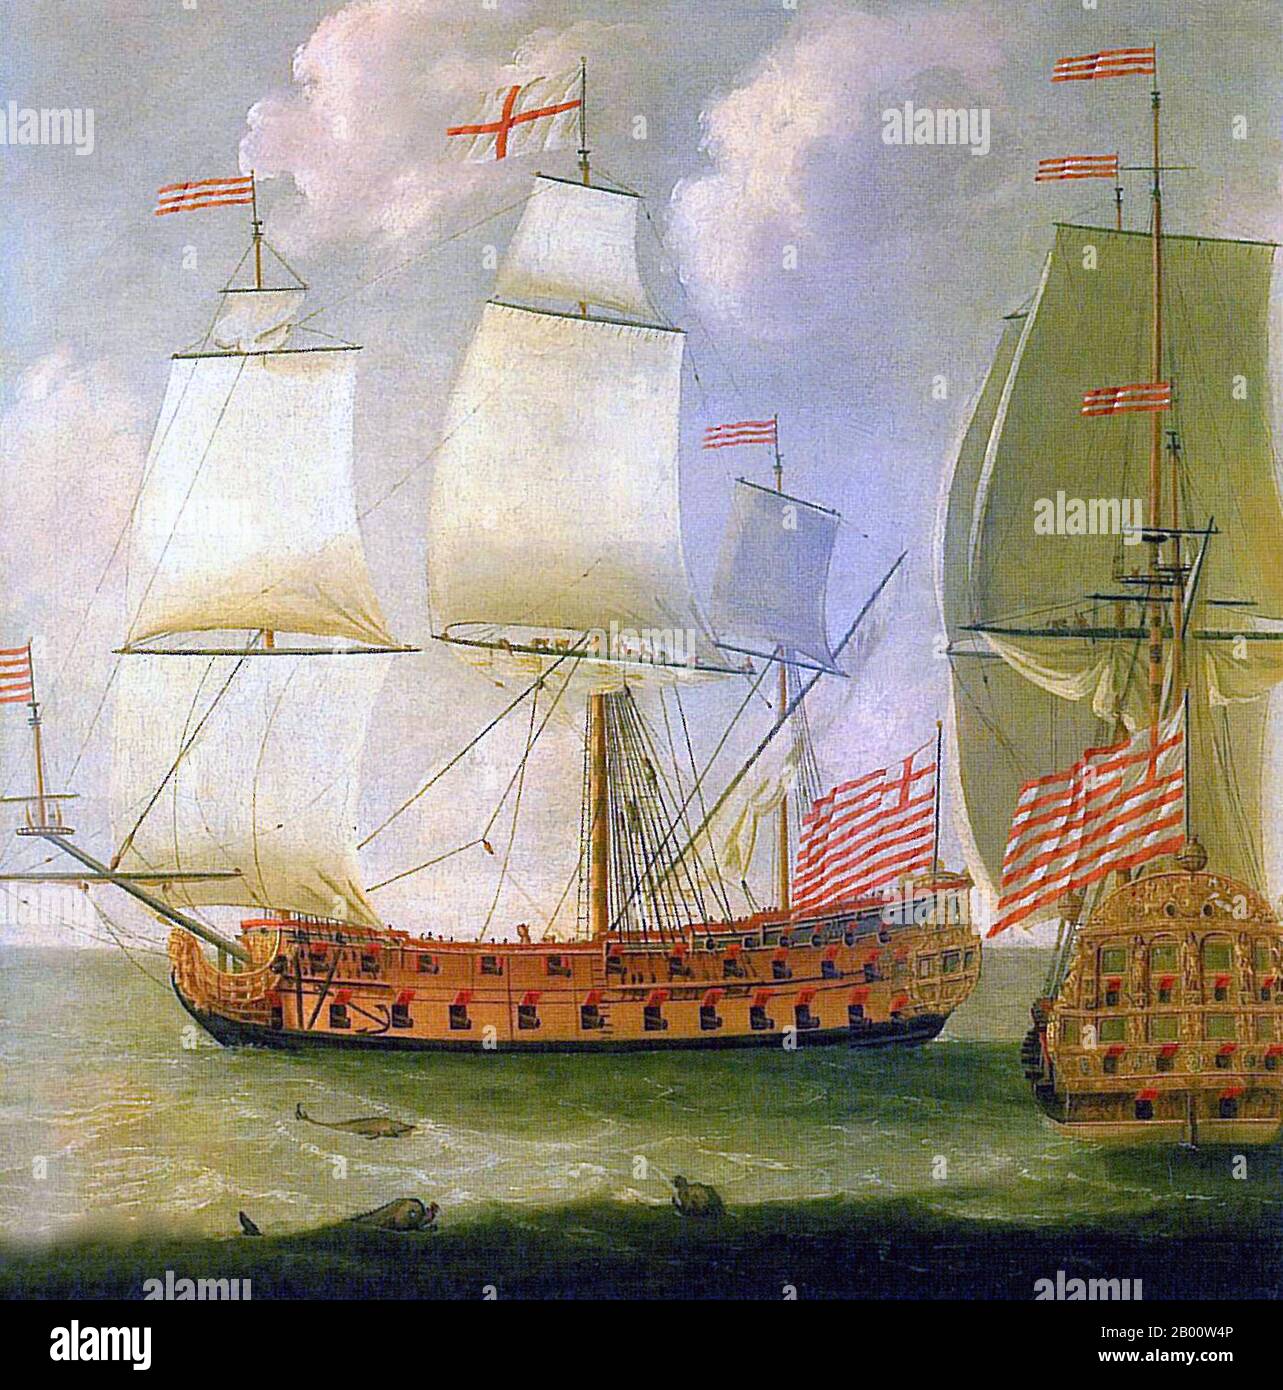 UK: 'Two Views of an East Indiaman of the Time of King William III'. Oil on canvas painting by Isaac Sailmaker (1633-1721), c. 1685.  The East India Company (also known as the East India Trading Company, English East India Company and the British East India Company) was an early English joint-stock company that was formed initially for pursuing trade with the East Indies, but that ended up trading mainly with the Indian subcontinent and China. The oldest among several similarly formed European East India Companies, the Company was granted an English Royal Charter by Elizabeth I in 1600. Stock Photo